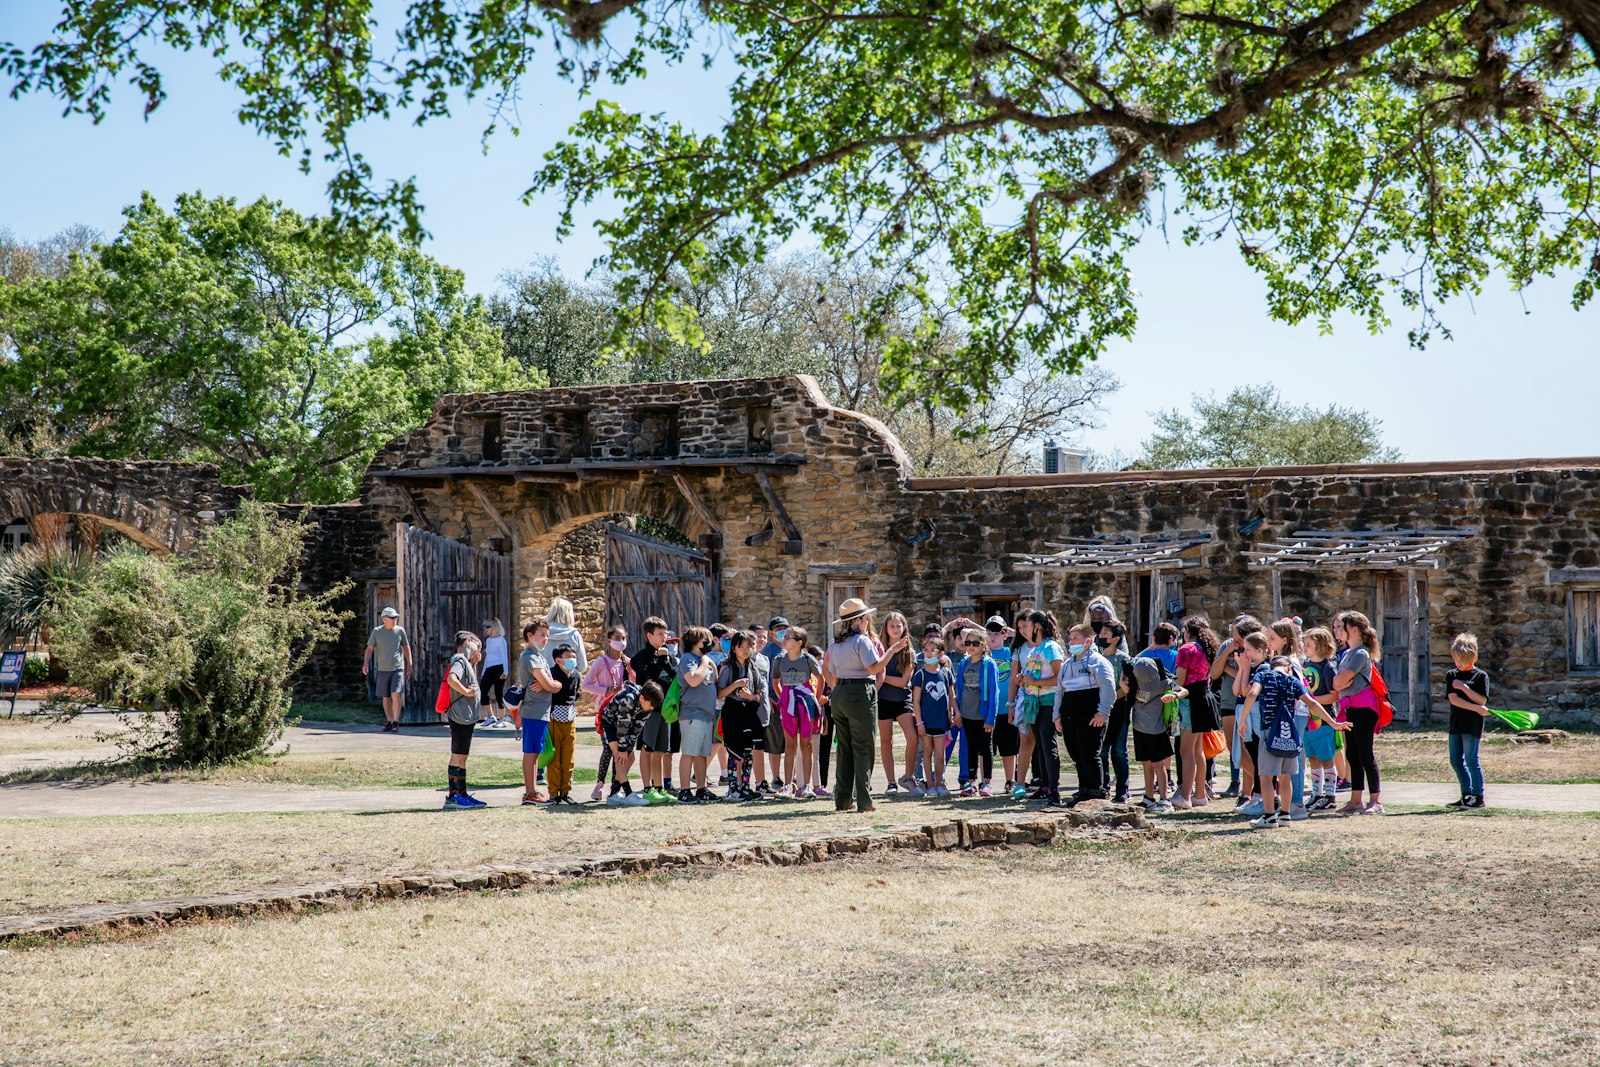 A group of students gather outside a historic stone structure